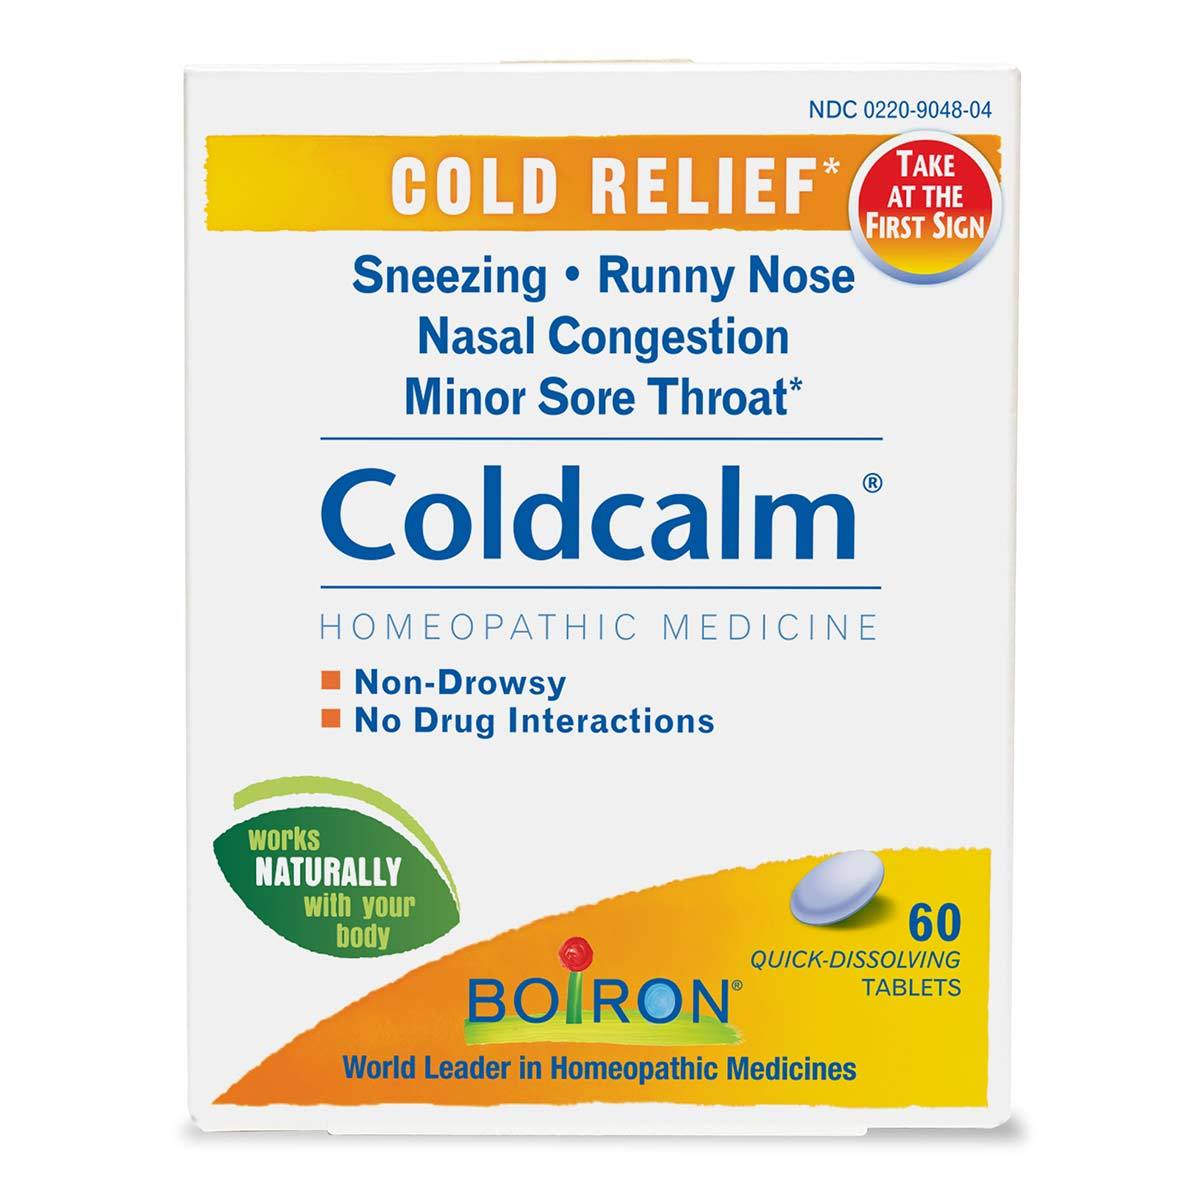 Primary image of Coldcalm